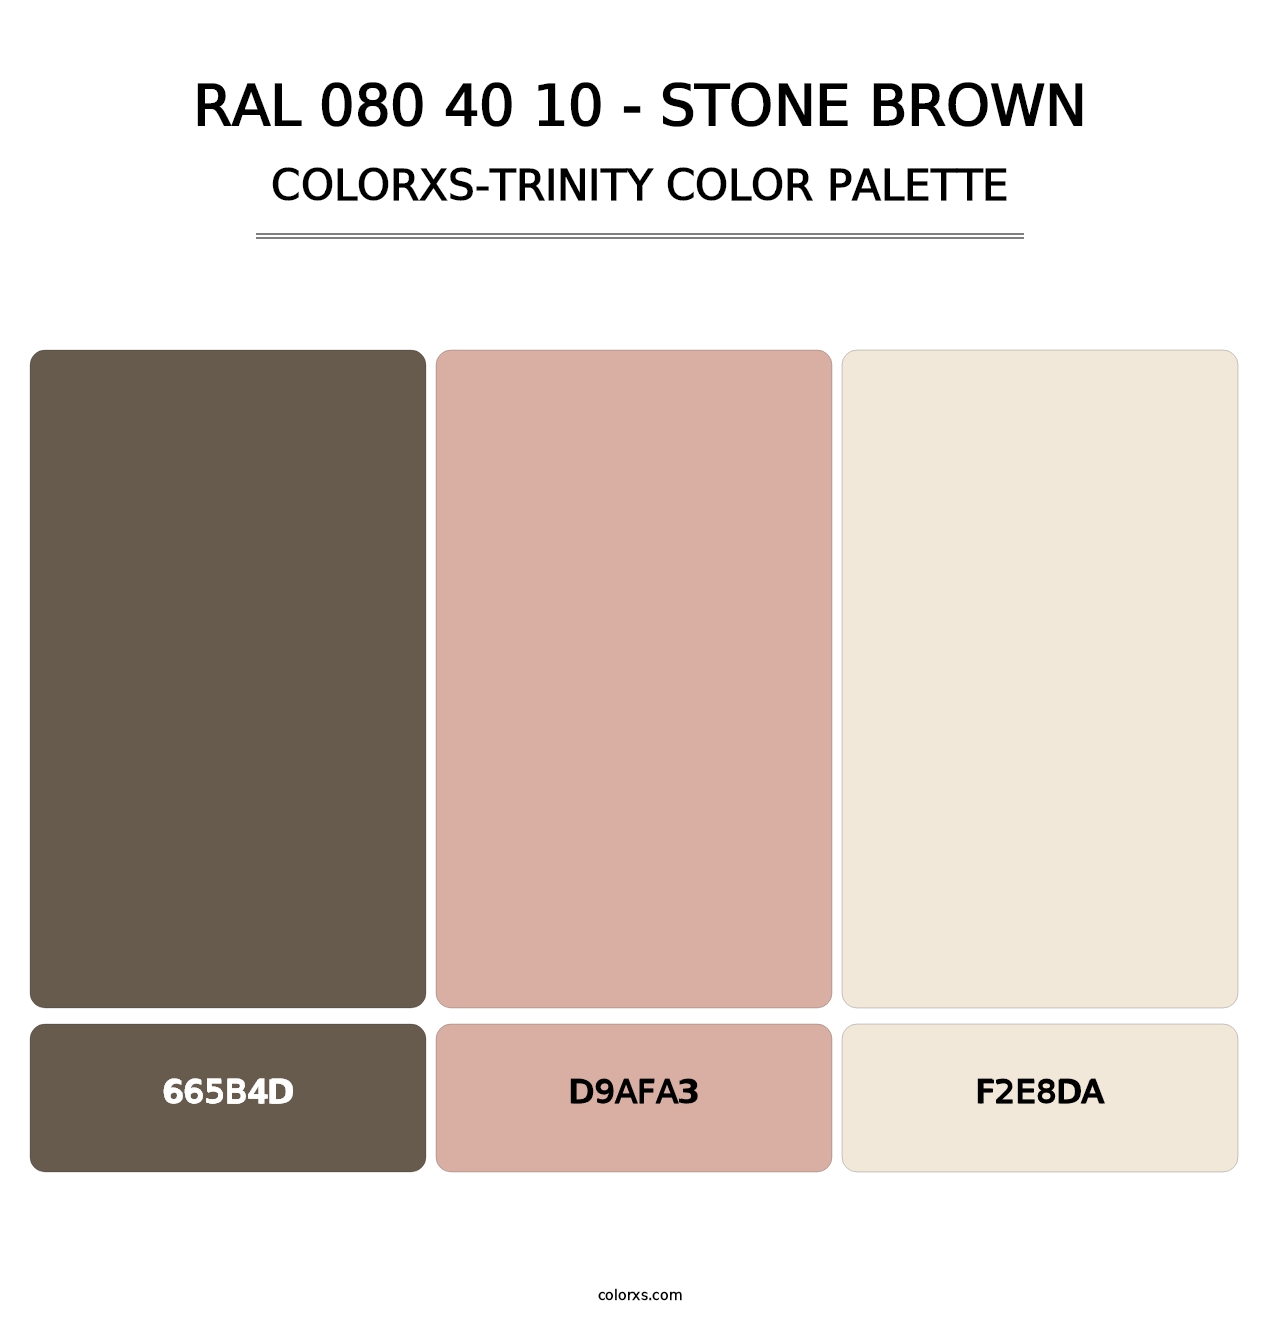 RAL 080 40 10 - Stone Brown - Colorxs Trinity Palette